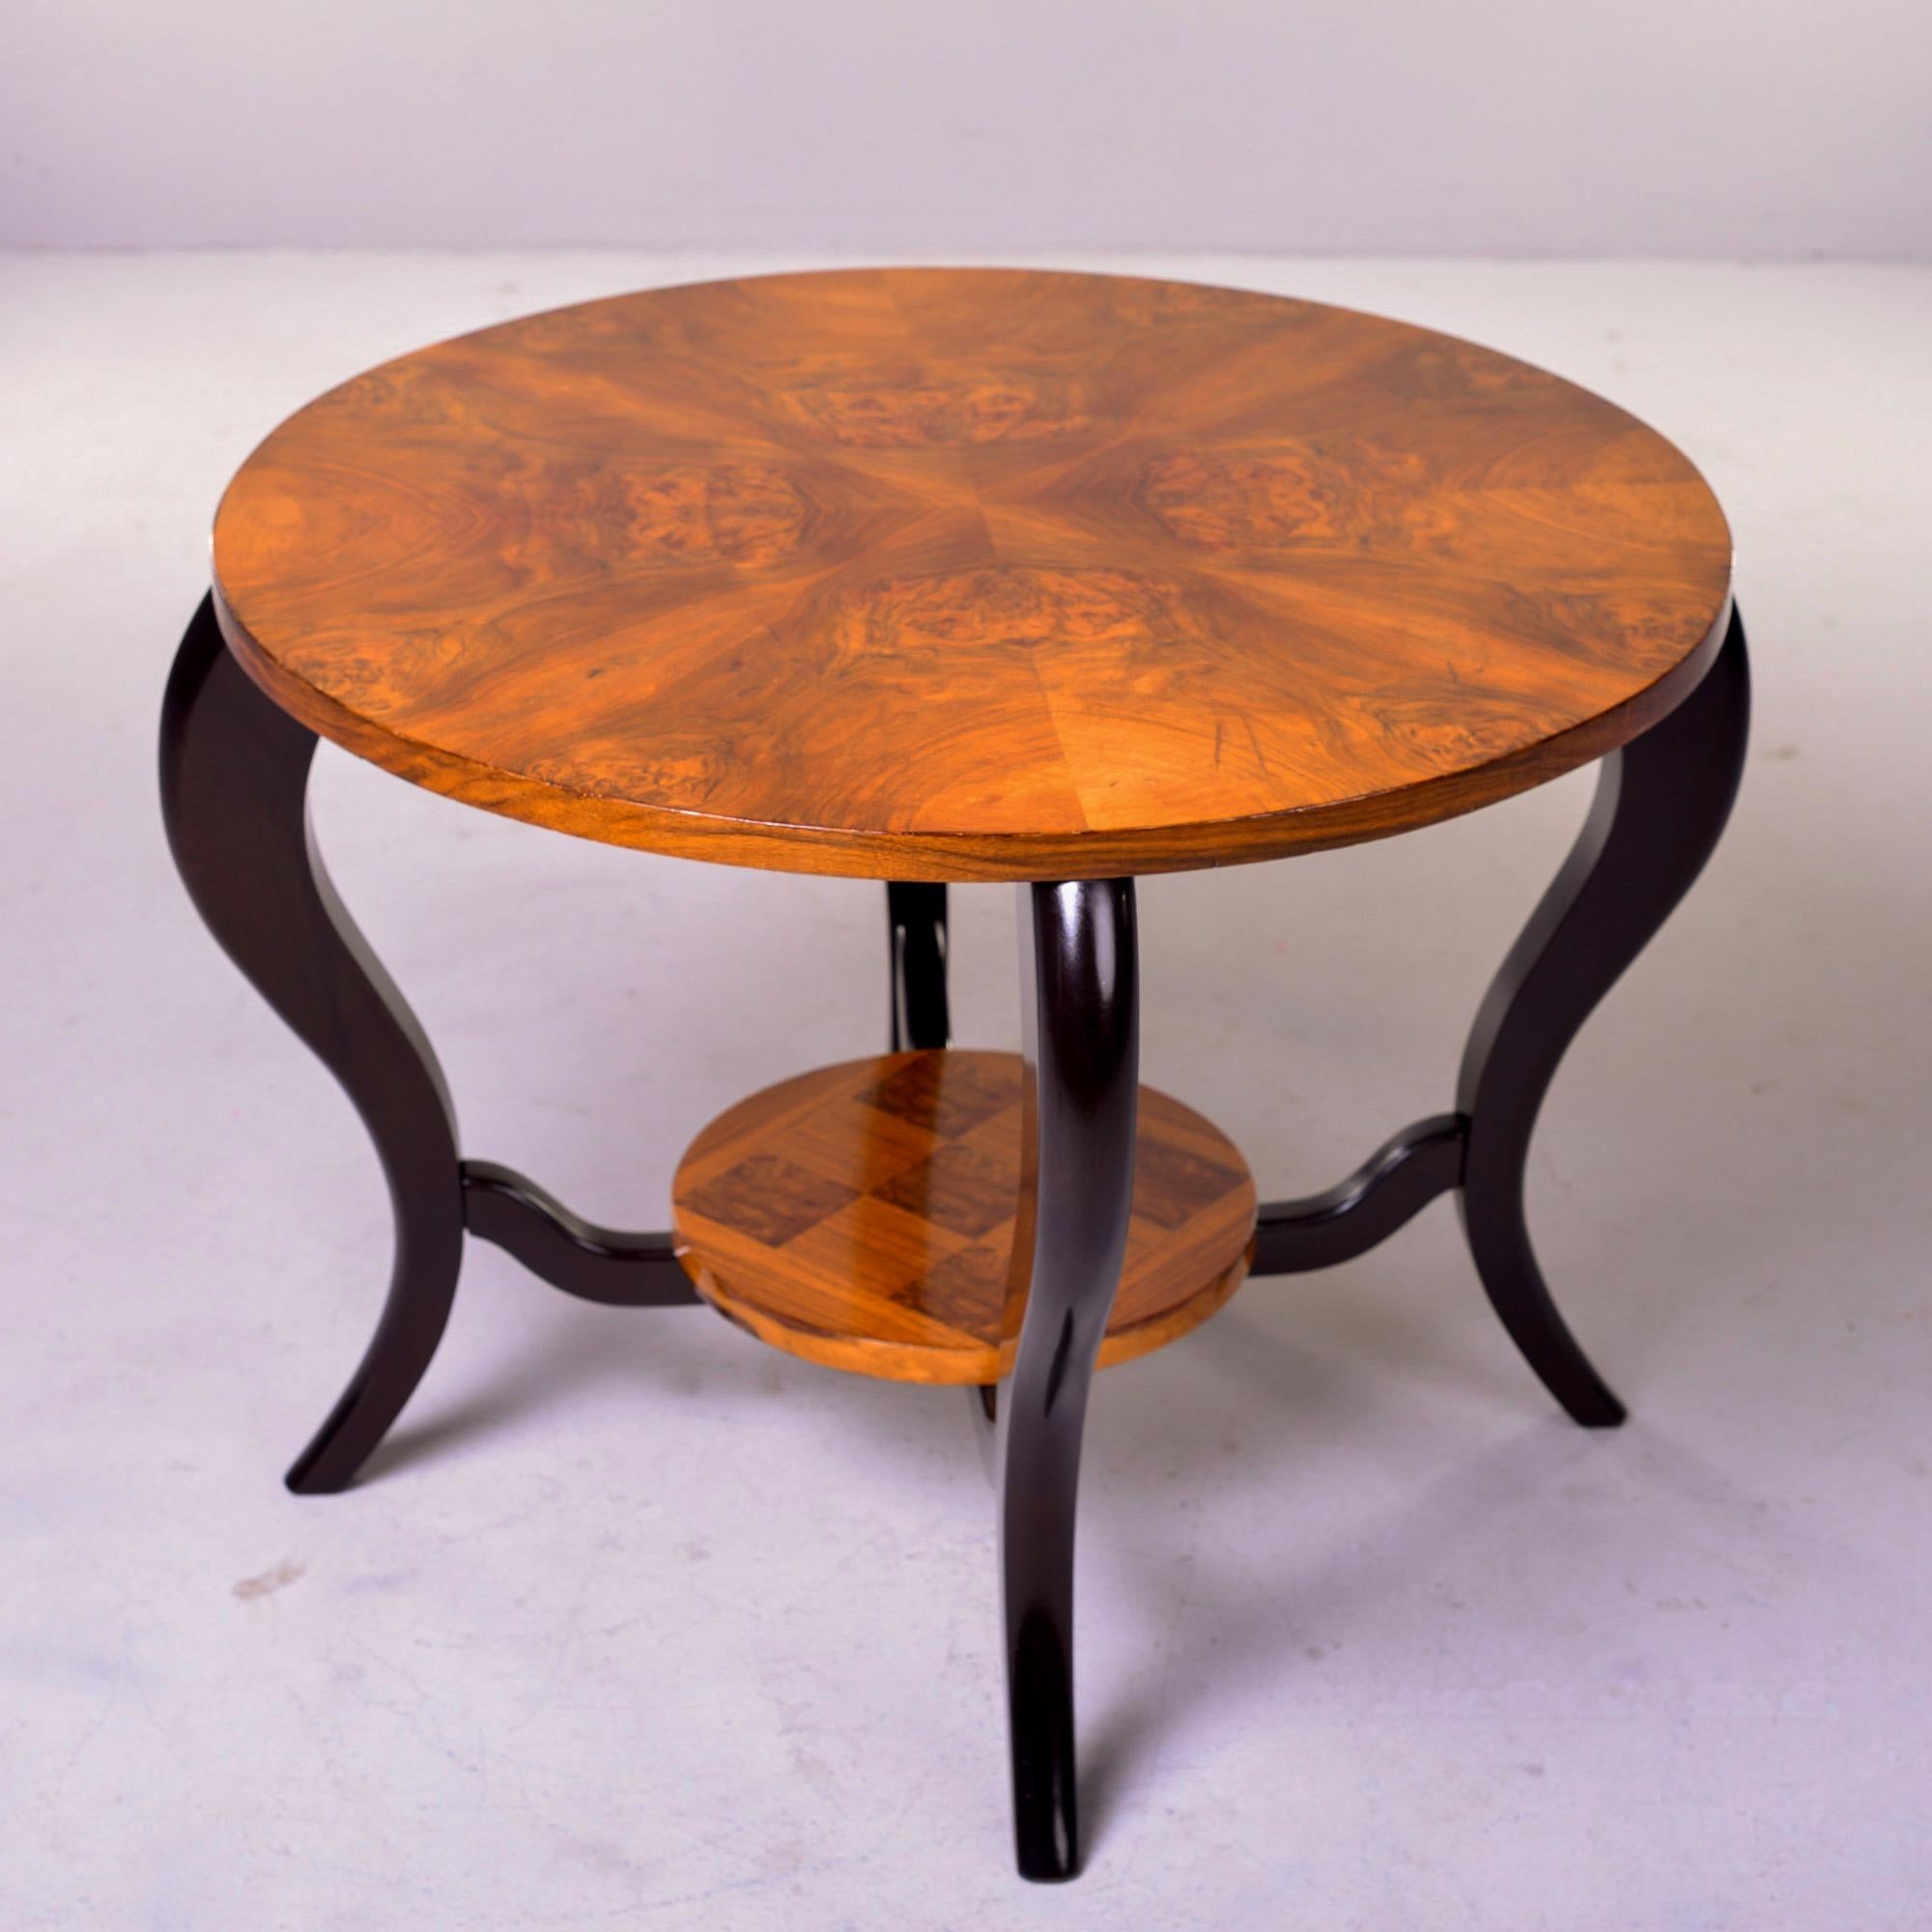 French Art Deco Two Tier Round Burl Wood Table with Black Legs 5